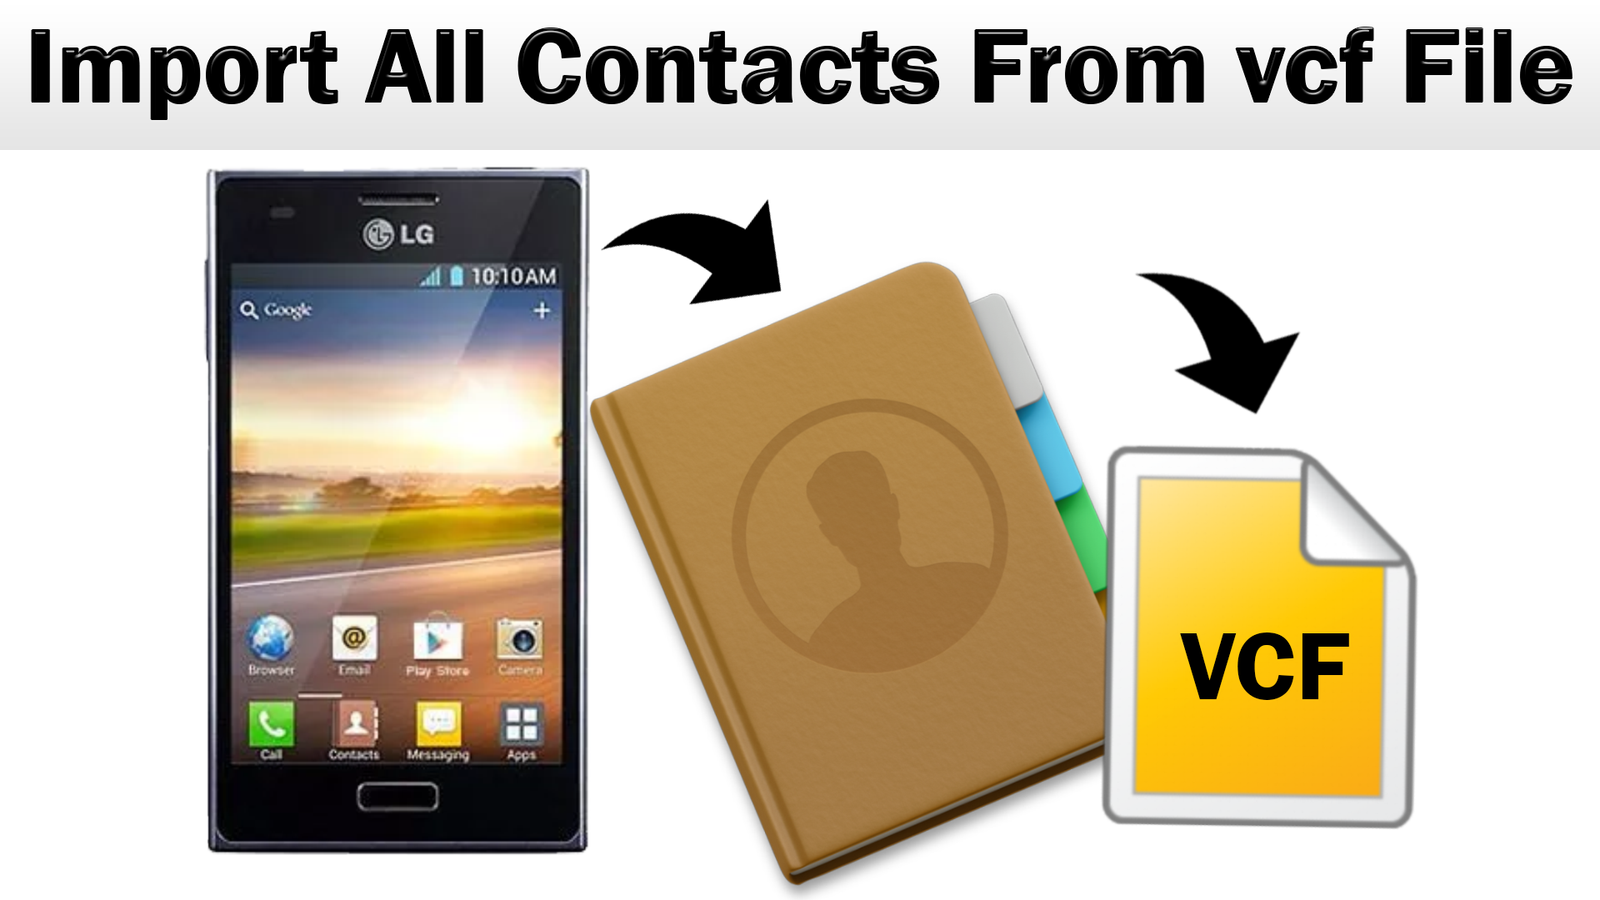 How to Import All Contacts From vcf File to LG Optimus 5